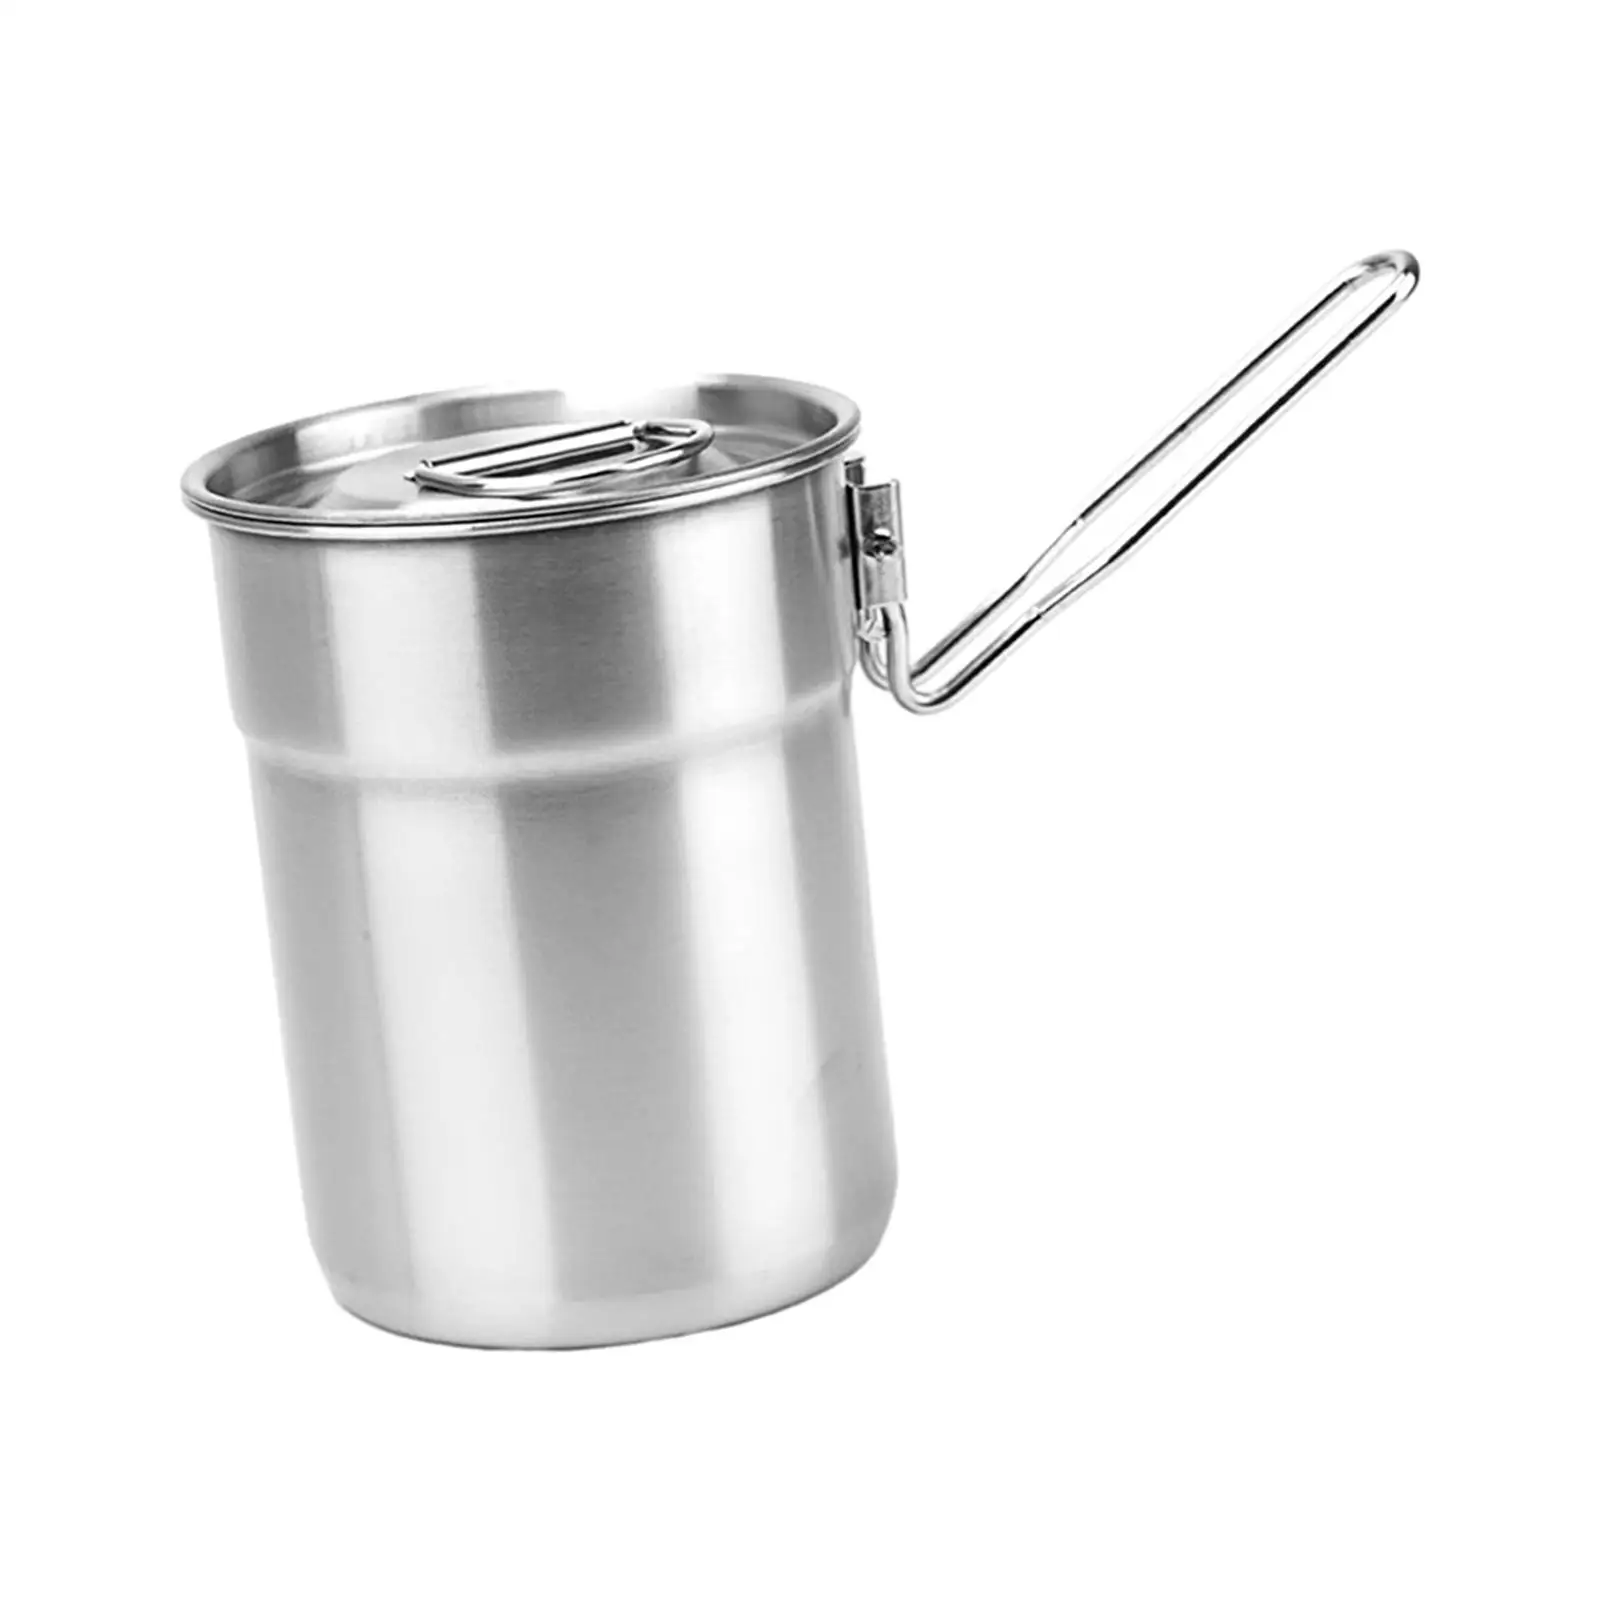 Camping Mug 1L with Folding Handle Stockpot Durable Camp Cookware Stainless Steel Cup for Everyday Beach Outdoors Travel Kitchen